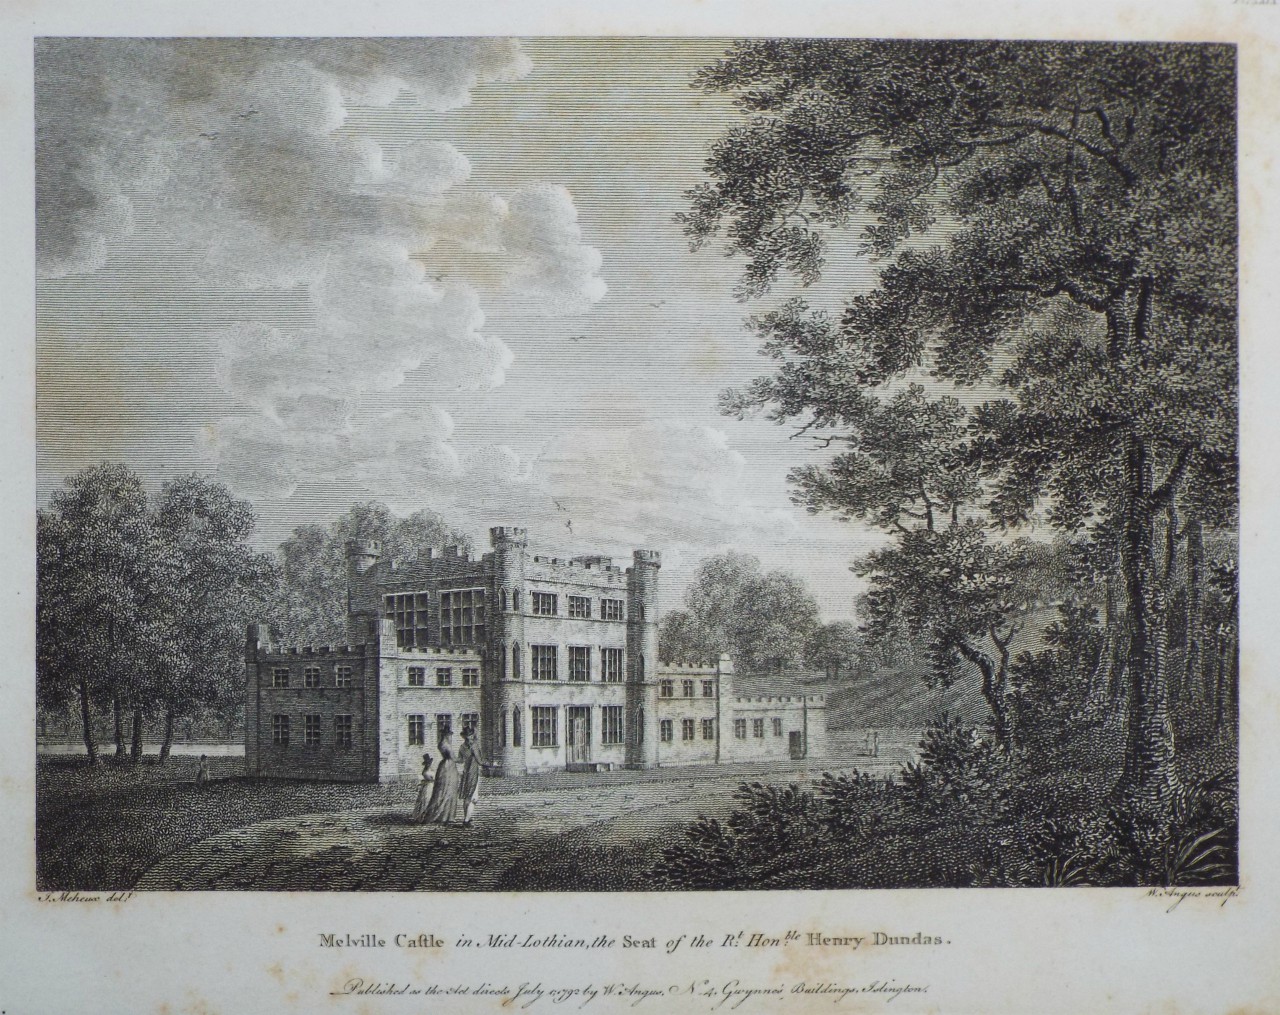 Print - Melville Castle in Mid-Lothian, the Seat of the Rt. Honble Henry Dundas. - Angus